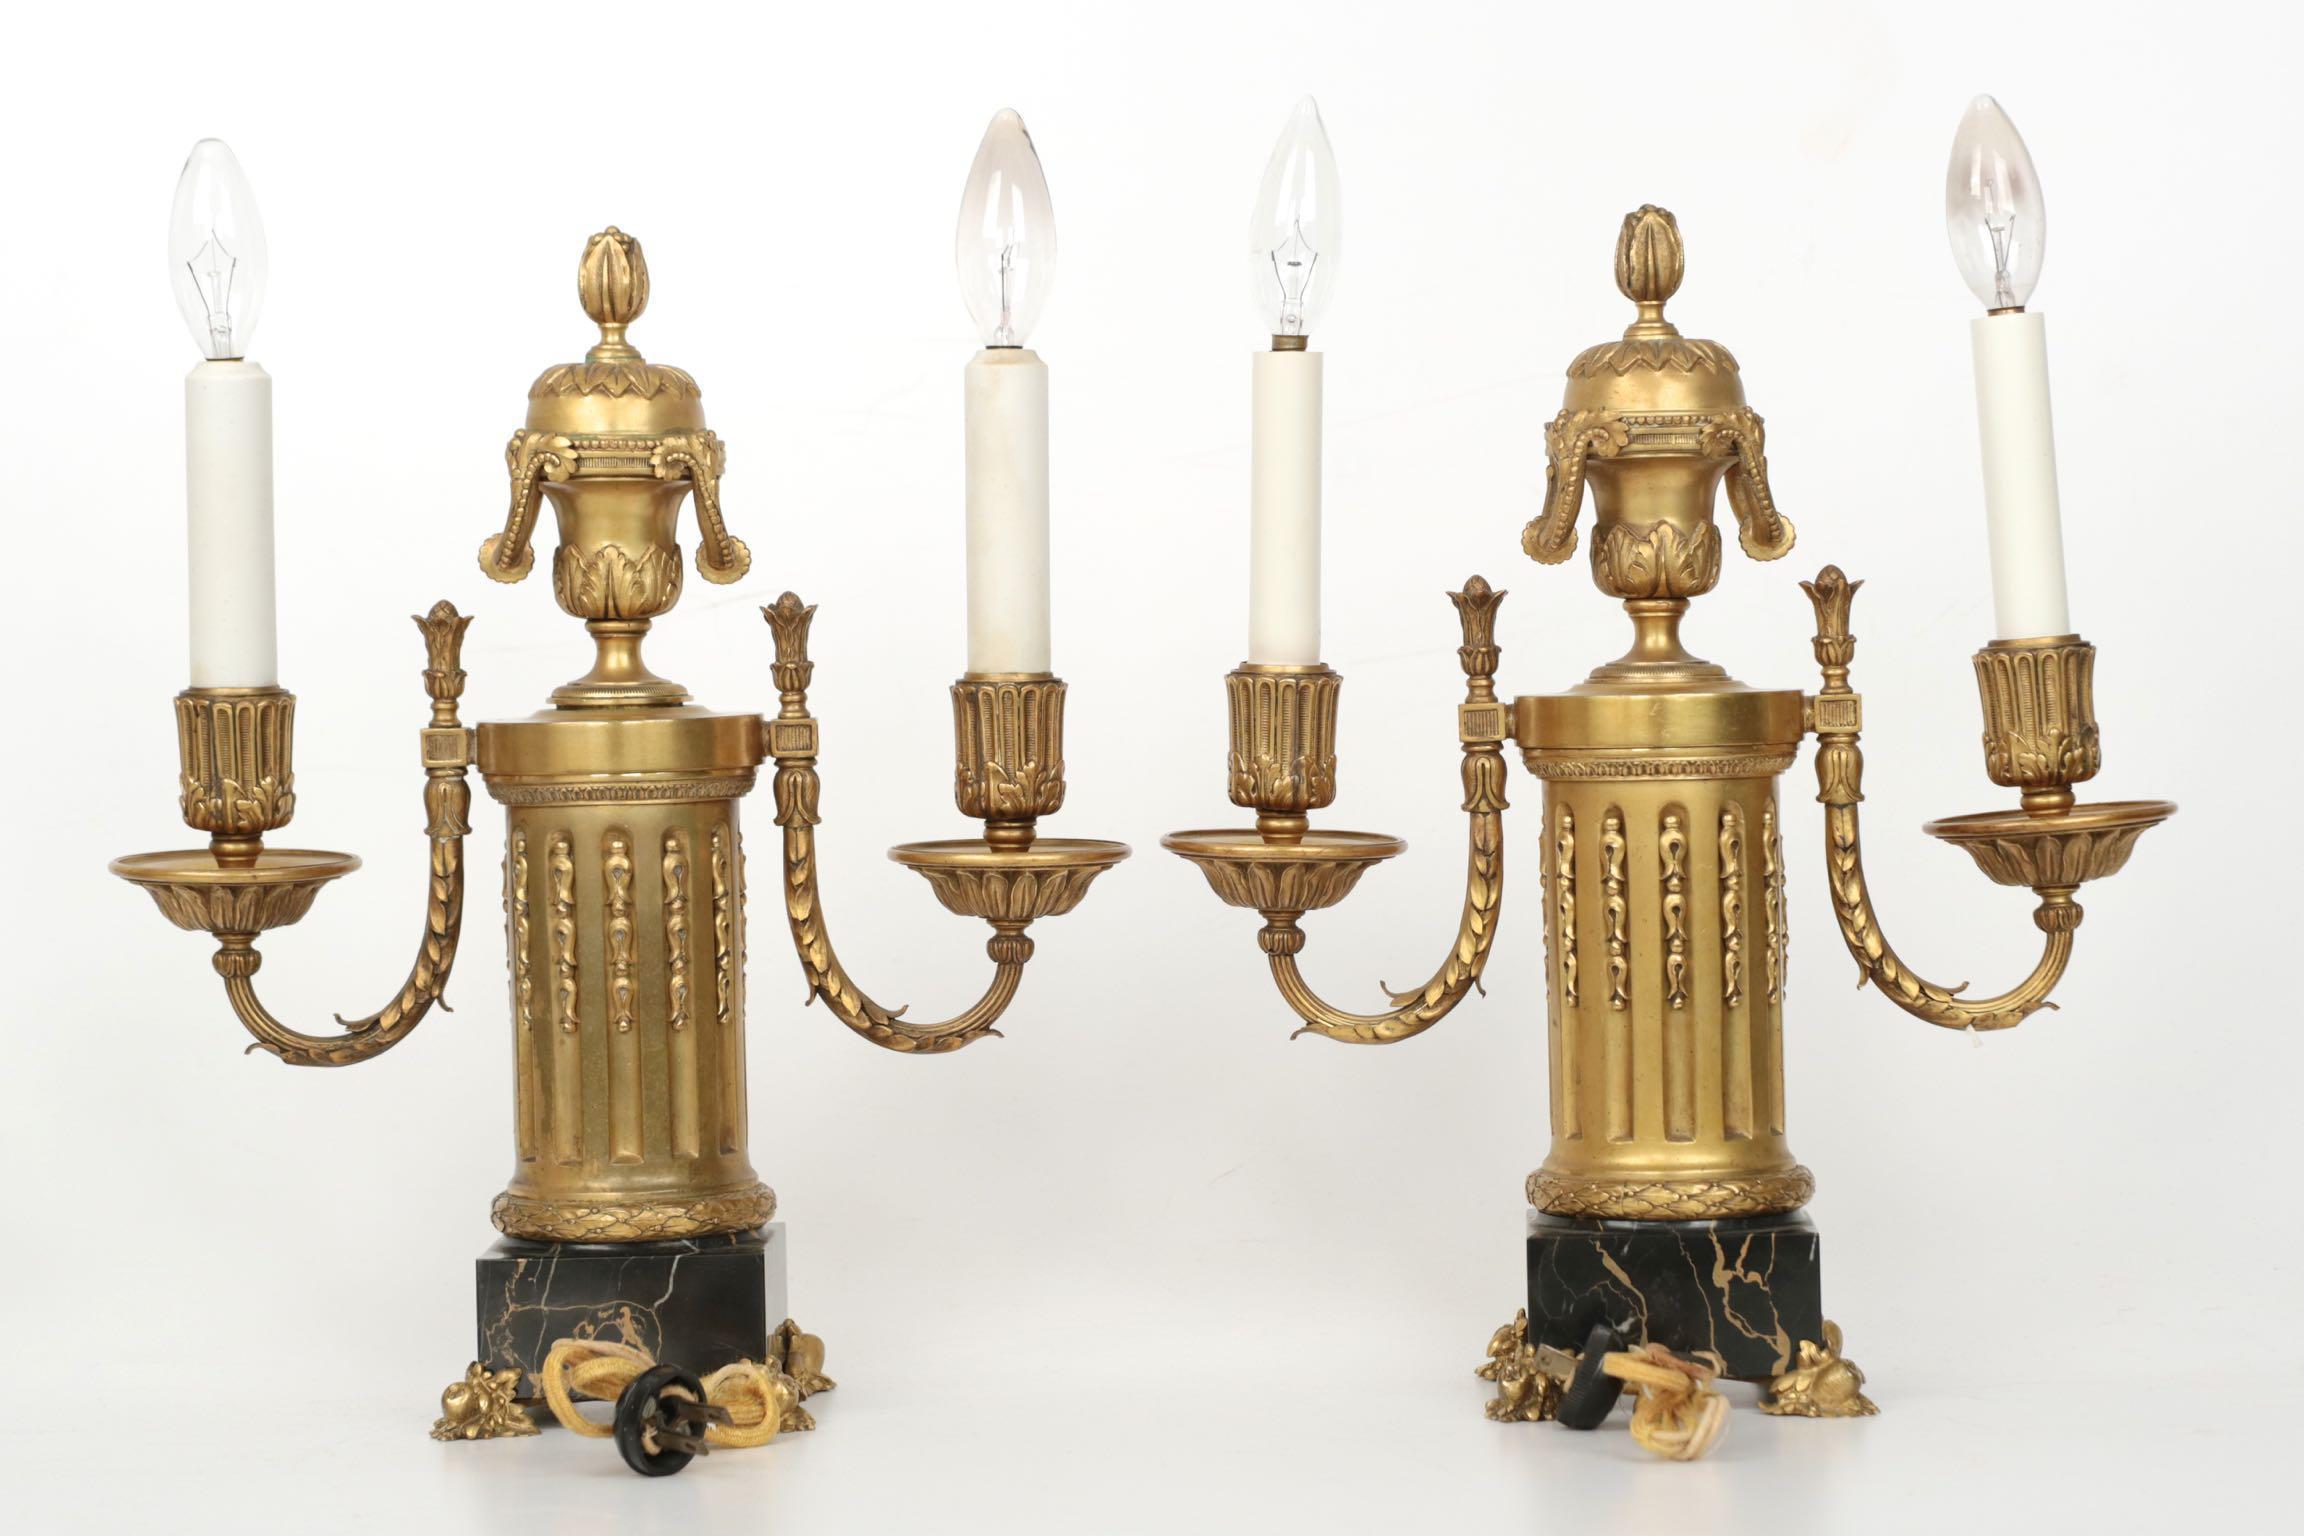 FINE PAIR OF GILT BRONZE AND MARBLE LAMPS BY E.F. CALDWELL
New York, circa 1900; foot stamped apparently A3933, unsigned
Item # 712KZW08P 

An exceptional and pristine pair of gilt bronze two-light lamps executed by the firm of Edward F. Caldwell